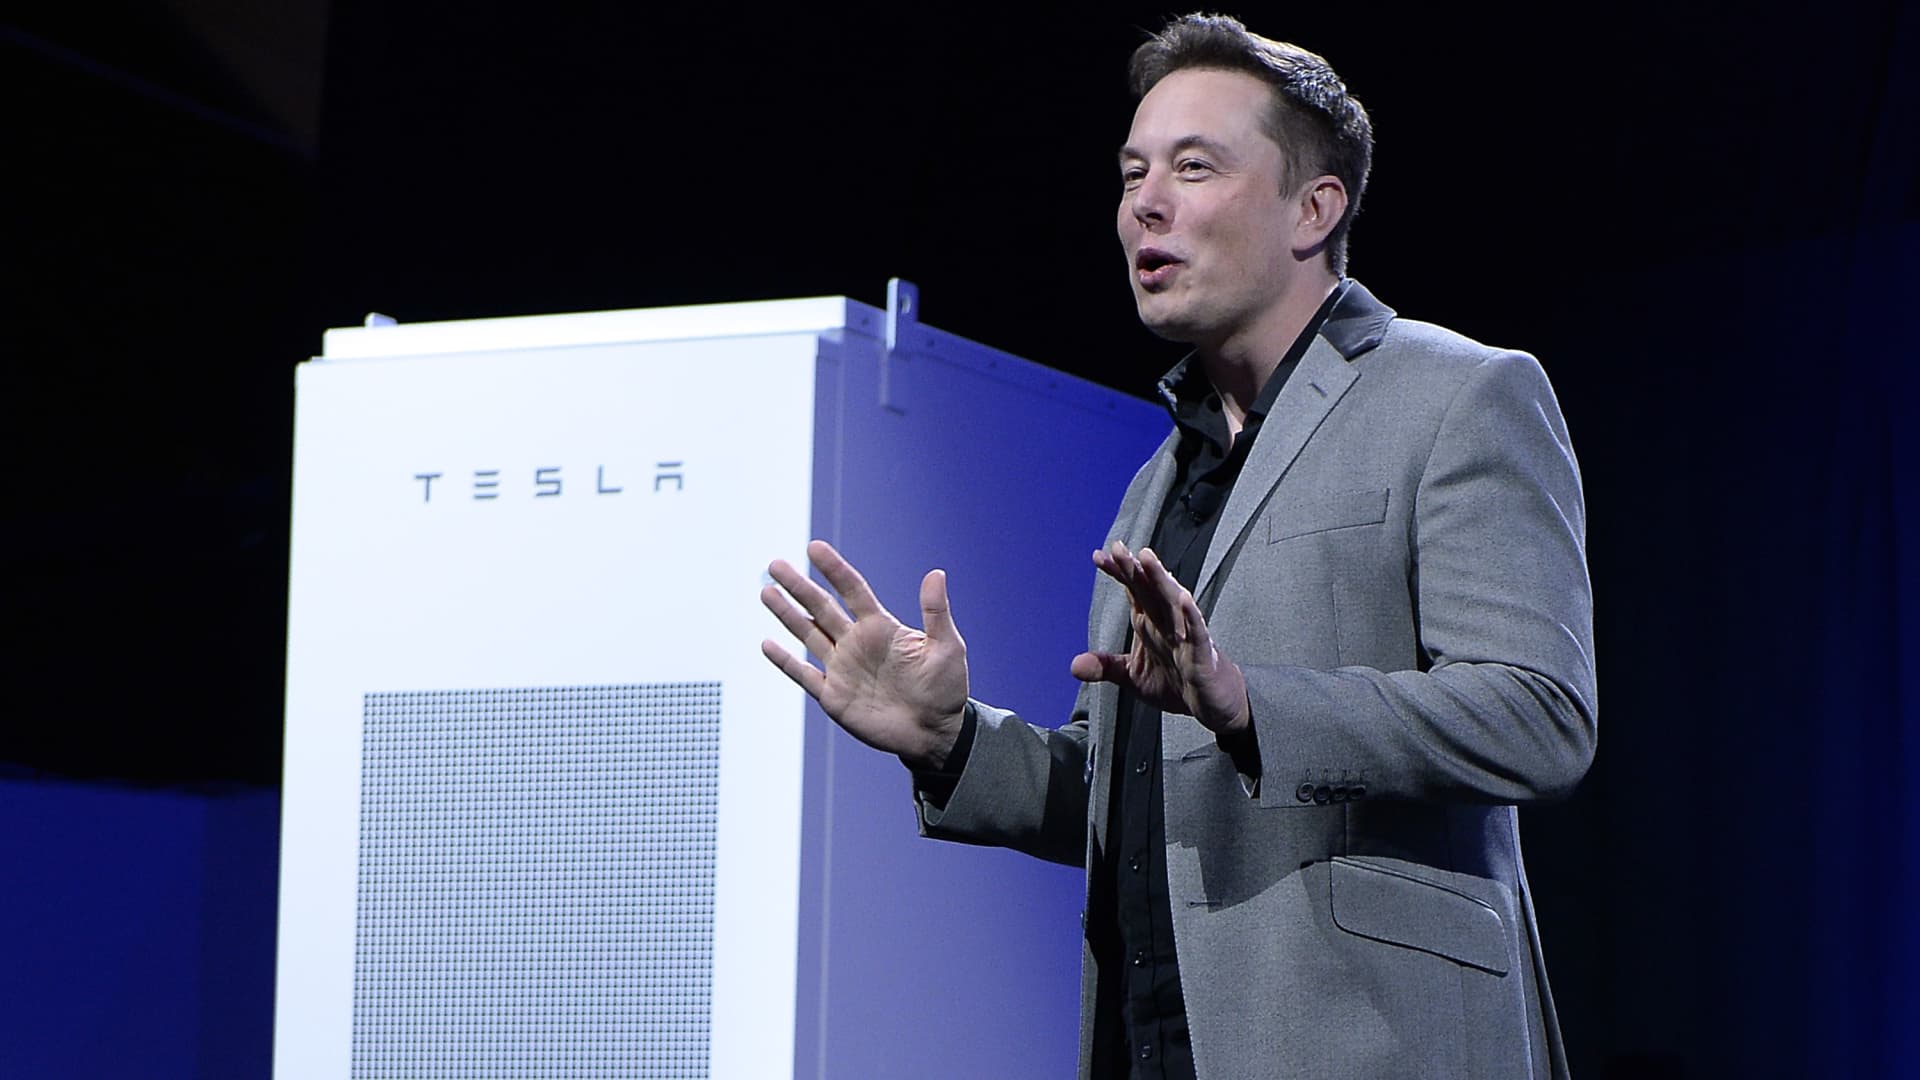 Elon Musk, CEO of Tesla, with a Powerpack unit the background unveils suit of batteries for homes, businesses, and utilities.